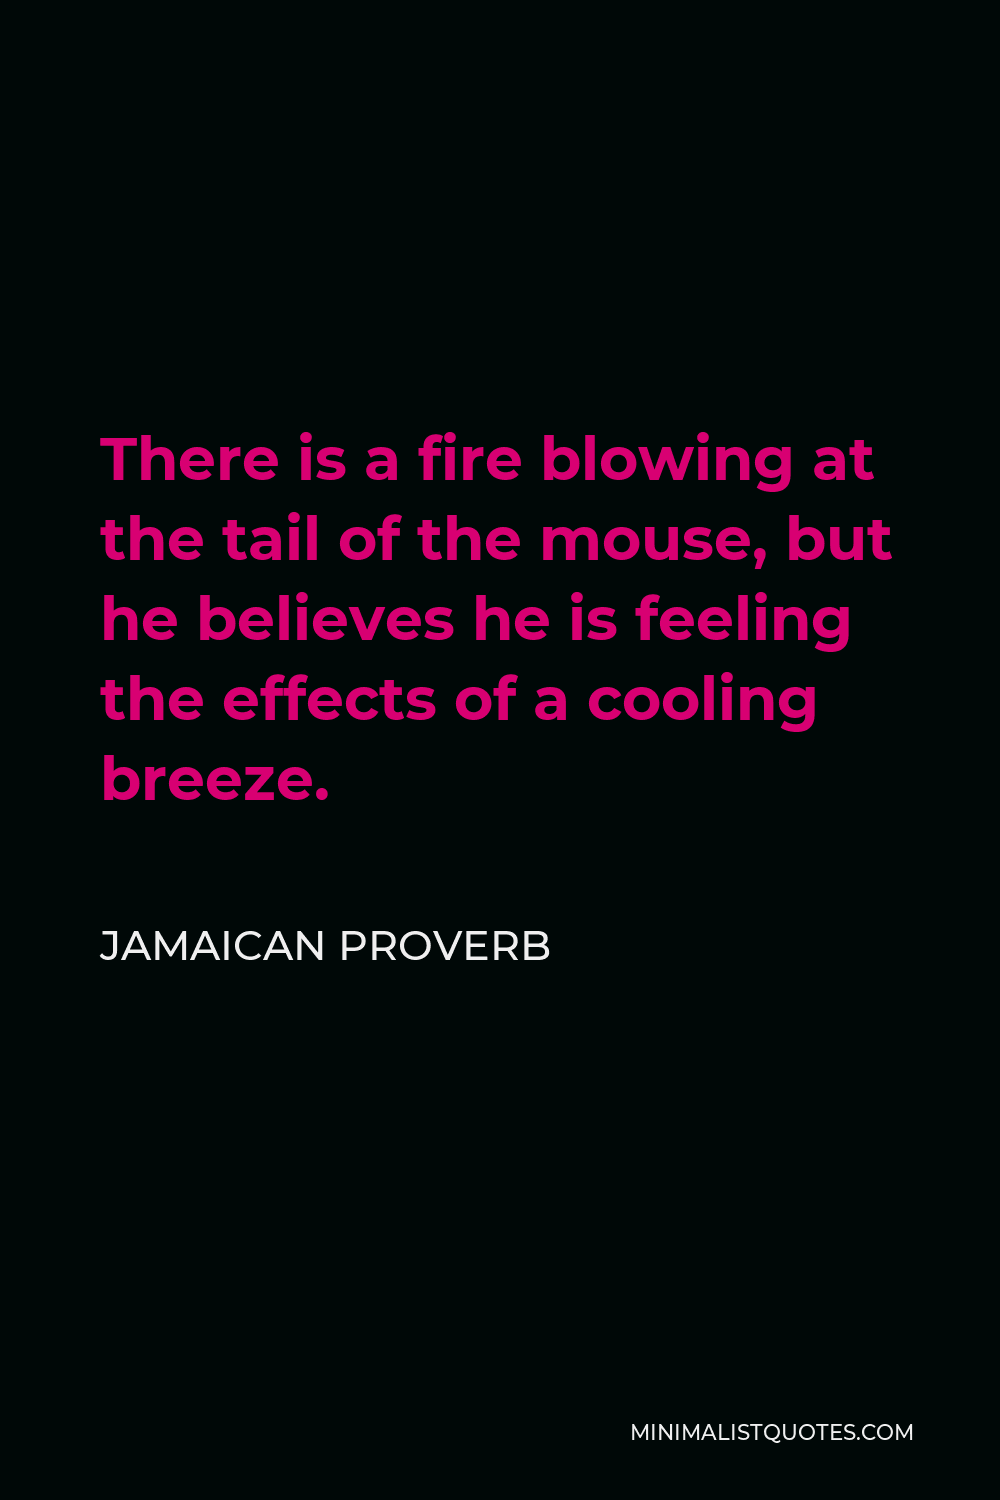 Jamaican Proverb Quote - There is a fire blowing at the tail of the mouse, but he believes he is feeling the effects of a cooling breeze.